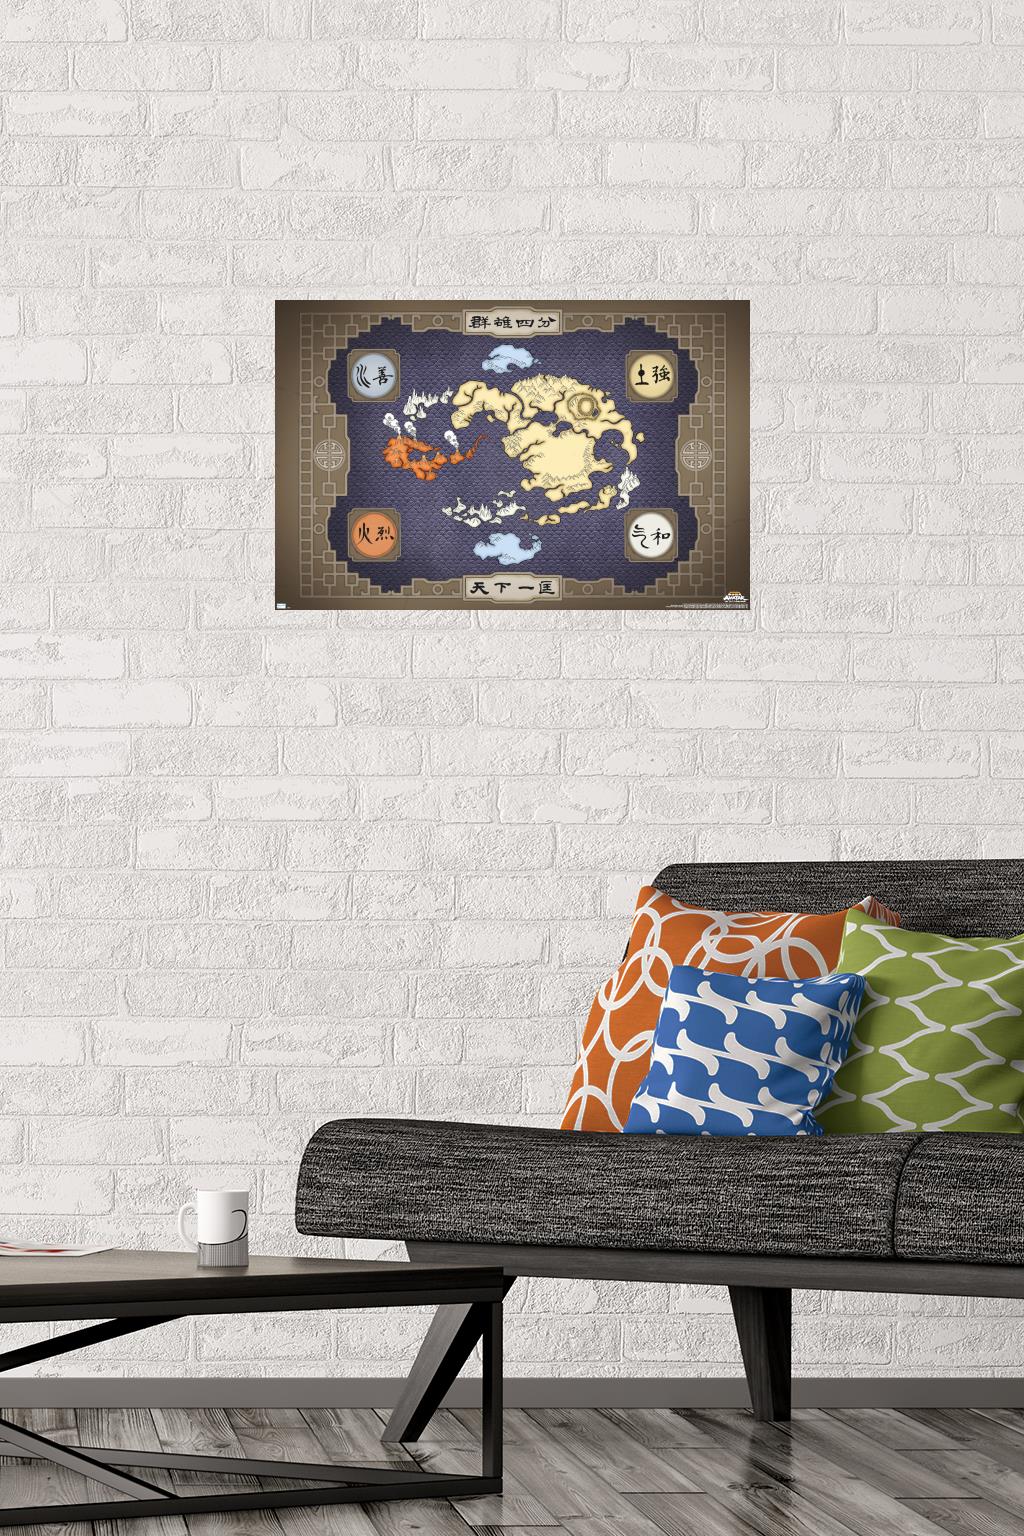 Avatar - Map Wall Poster, 14.725" x 22.375" - image 2 of 6